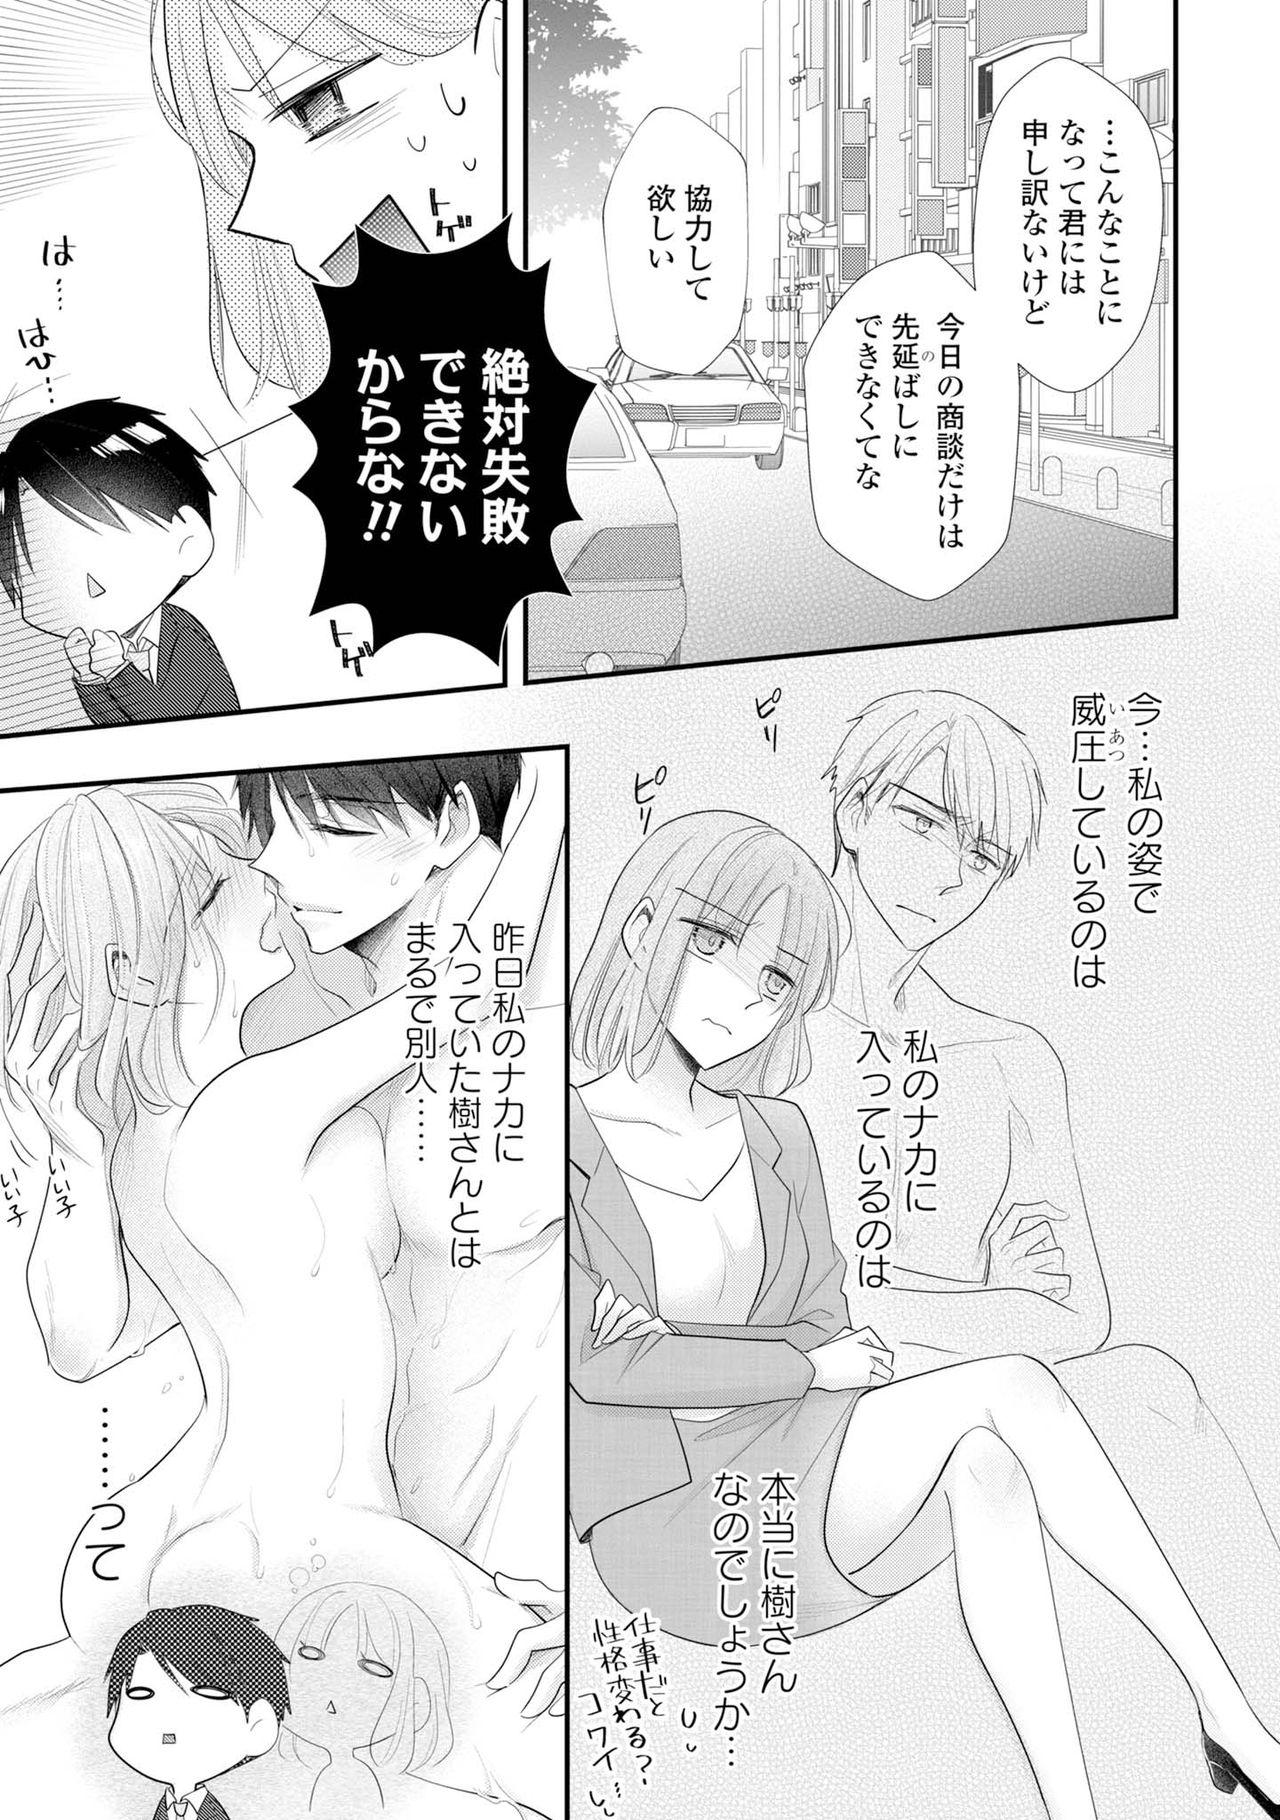 Gay Party 上司とエッチしたら挿れ替わっちゃった!?～彼が何度も入ってキちゃう…～ 第2-3話 Tributo - Page 5